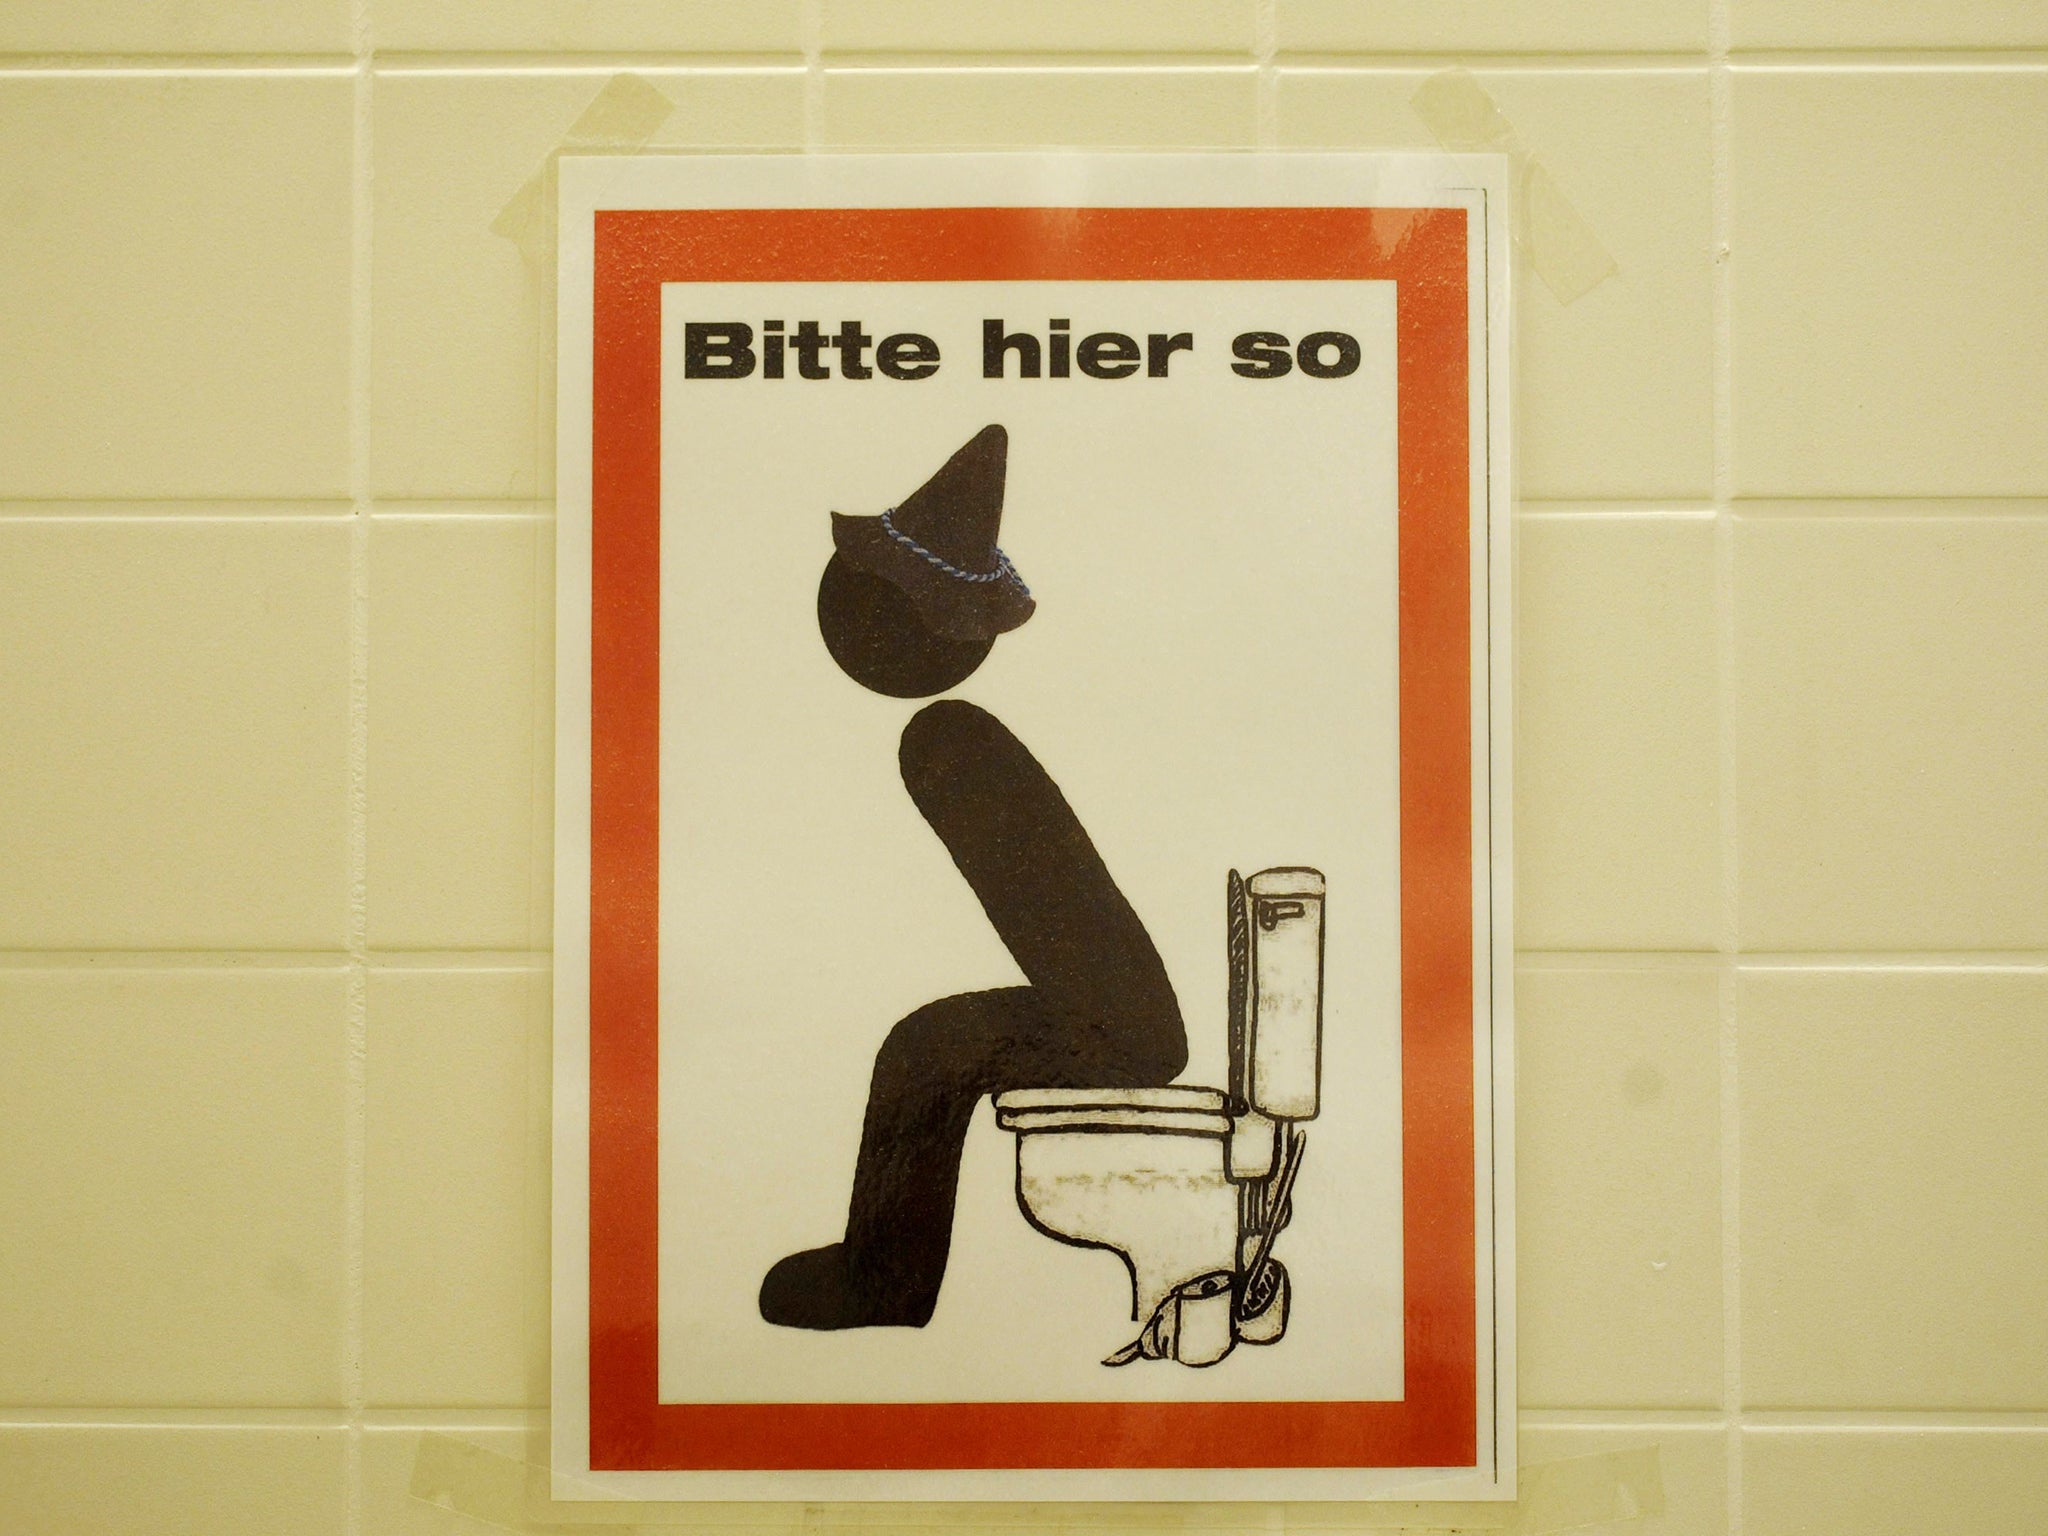 A sign reading "Bitte hier so" (please like this here) and depicting a seated man with bavarian hat on a toilet